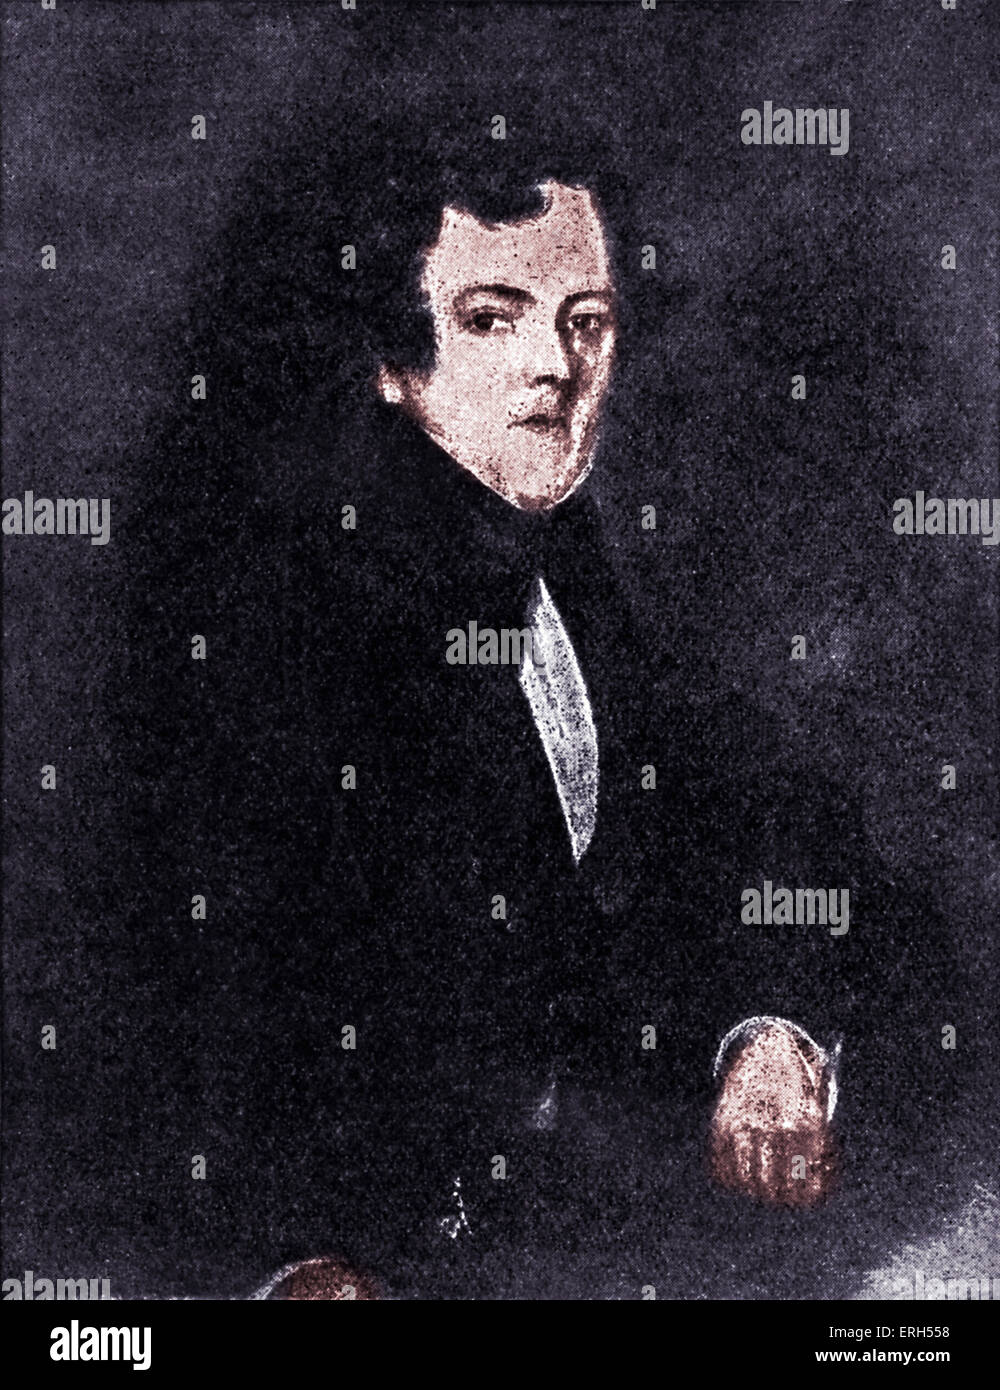 John Dickens - Charles Dickens's father  (1785 - 1851). From painting by John W. Gilbert. Tinted version. Stock Photo